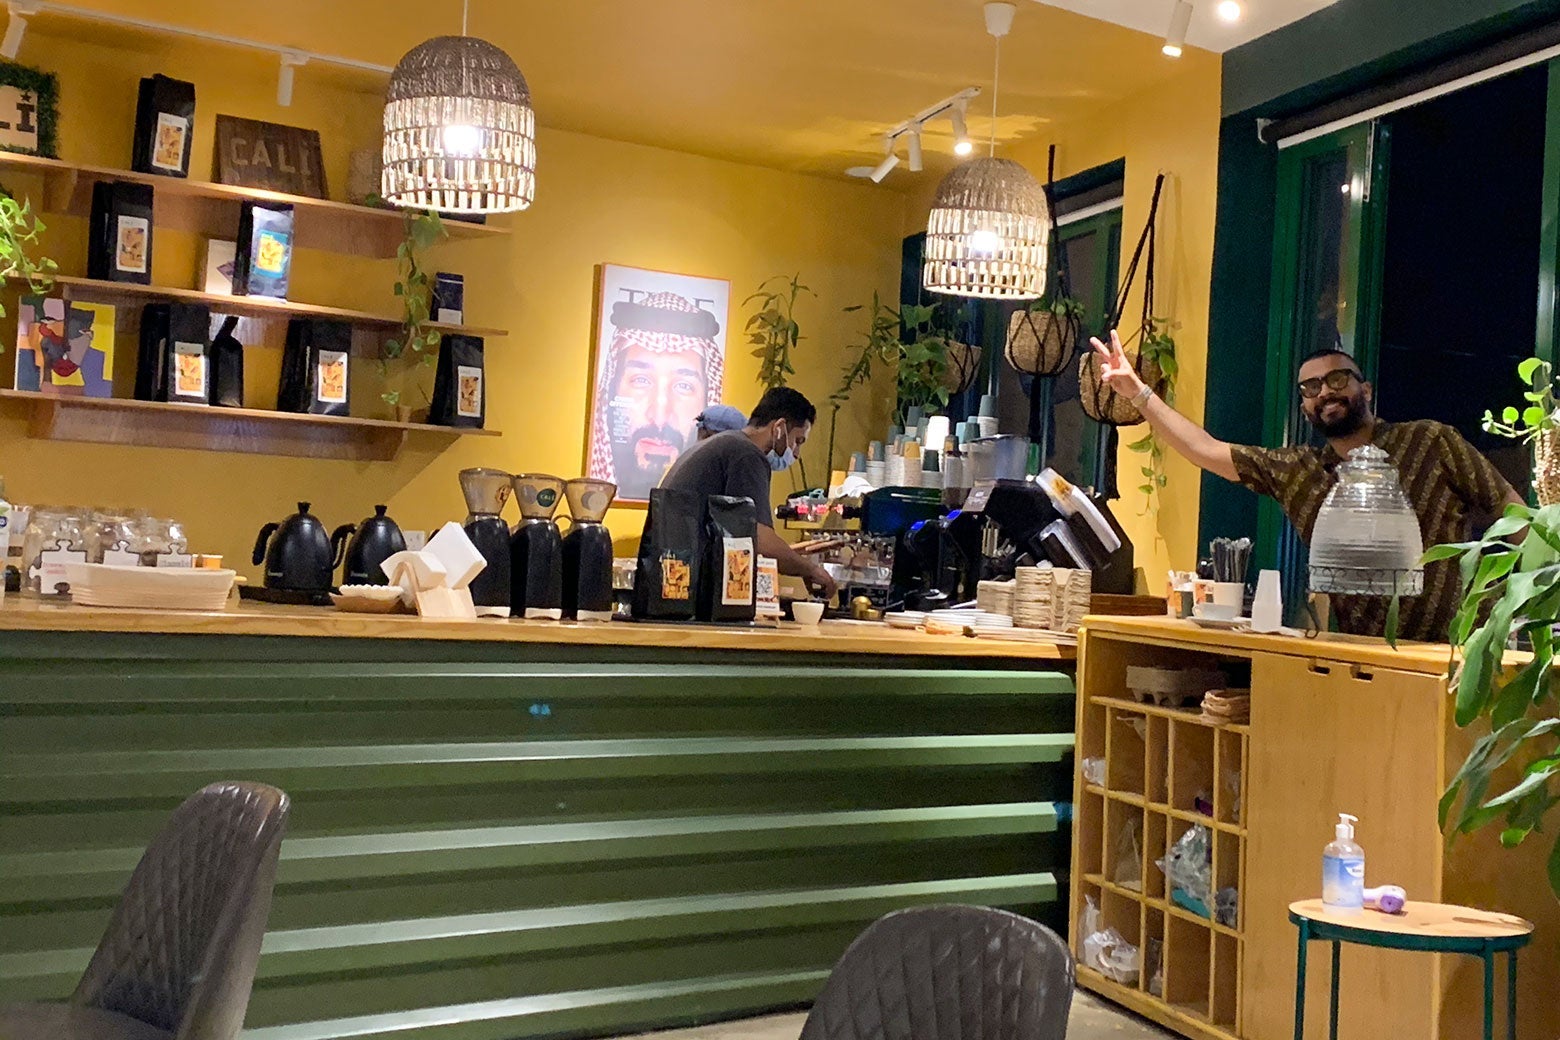 Employees behind the coffeeshop counter with a photo of Mohamed Bin Salman on the wall.